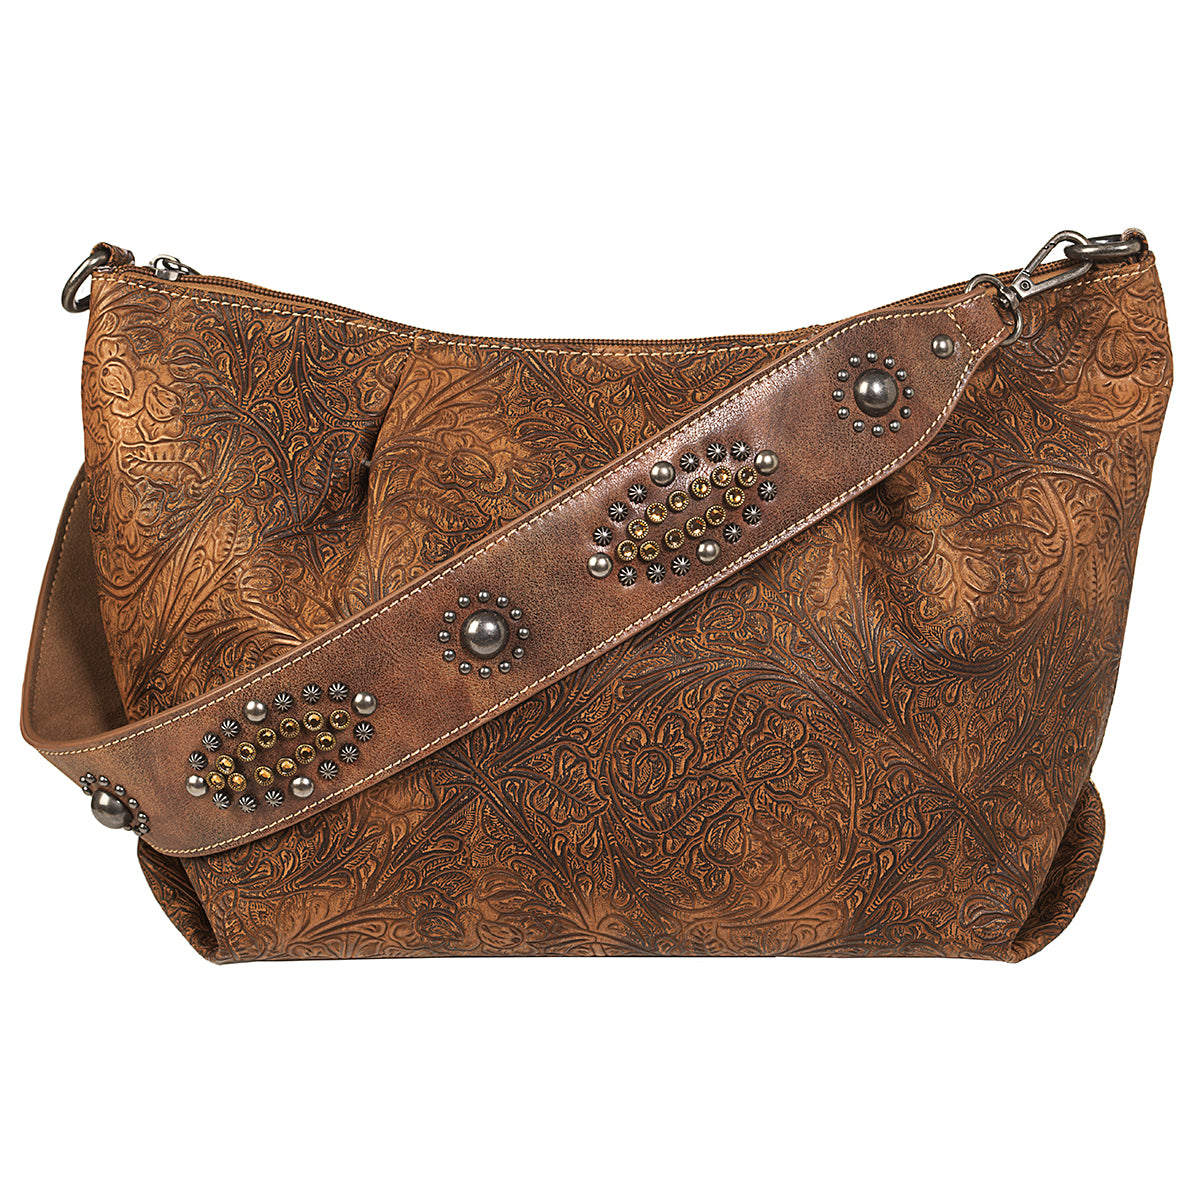 Nocona Women's Ophelia Style Conceal Carry Shoulder Bag - Brown